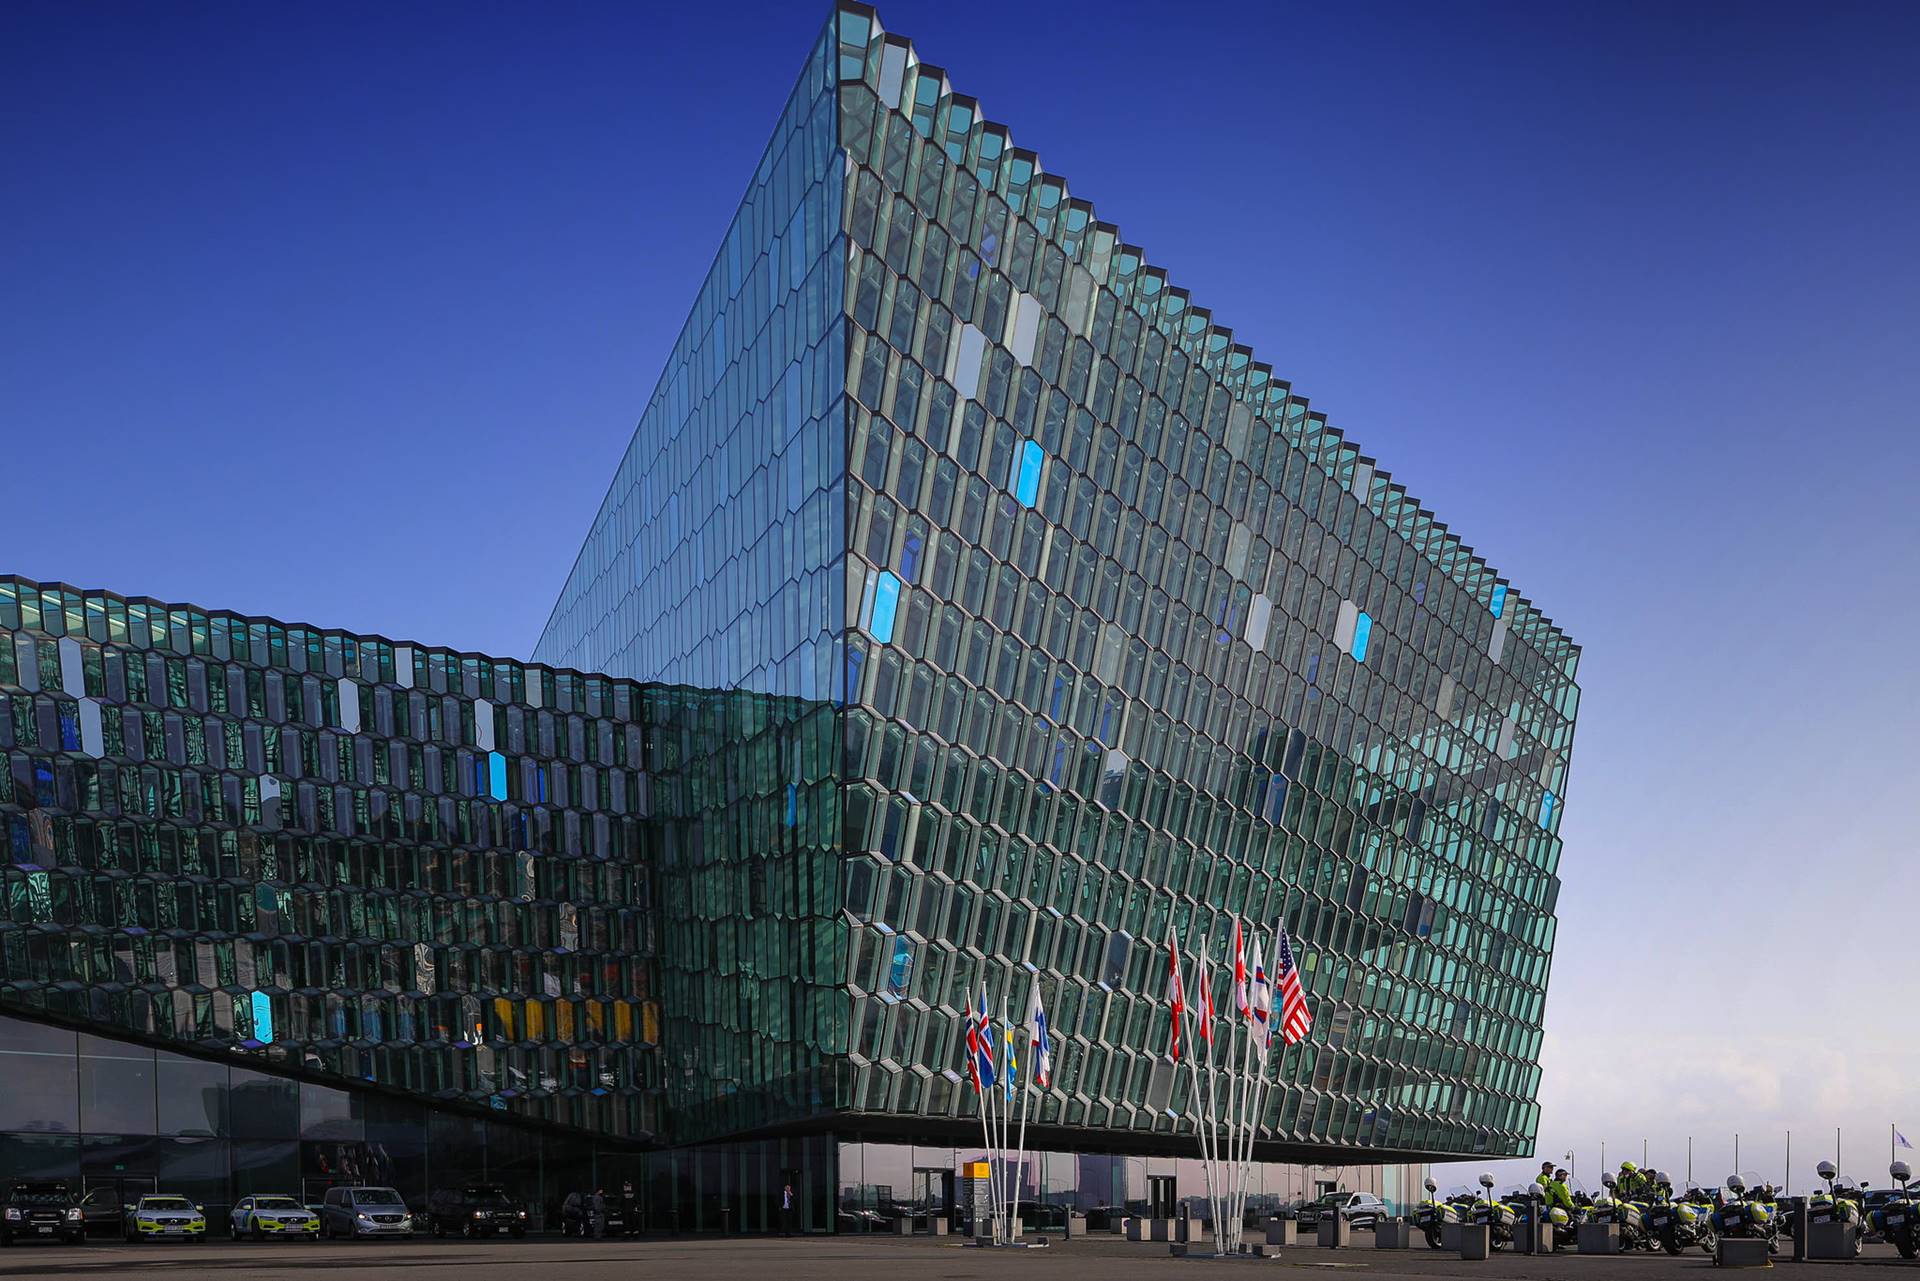 Harpa Concert Hall and Conference Centre in Reykjavik where the 12th Arctic Council Ministerial Meeting took place in May 2021 - mynd